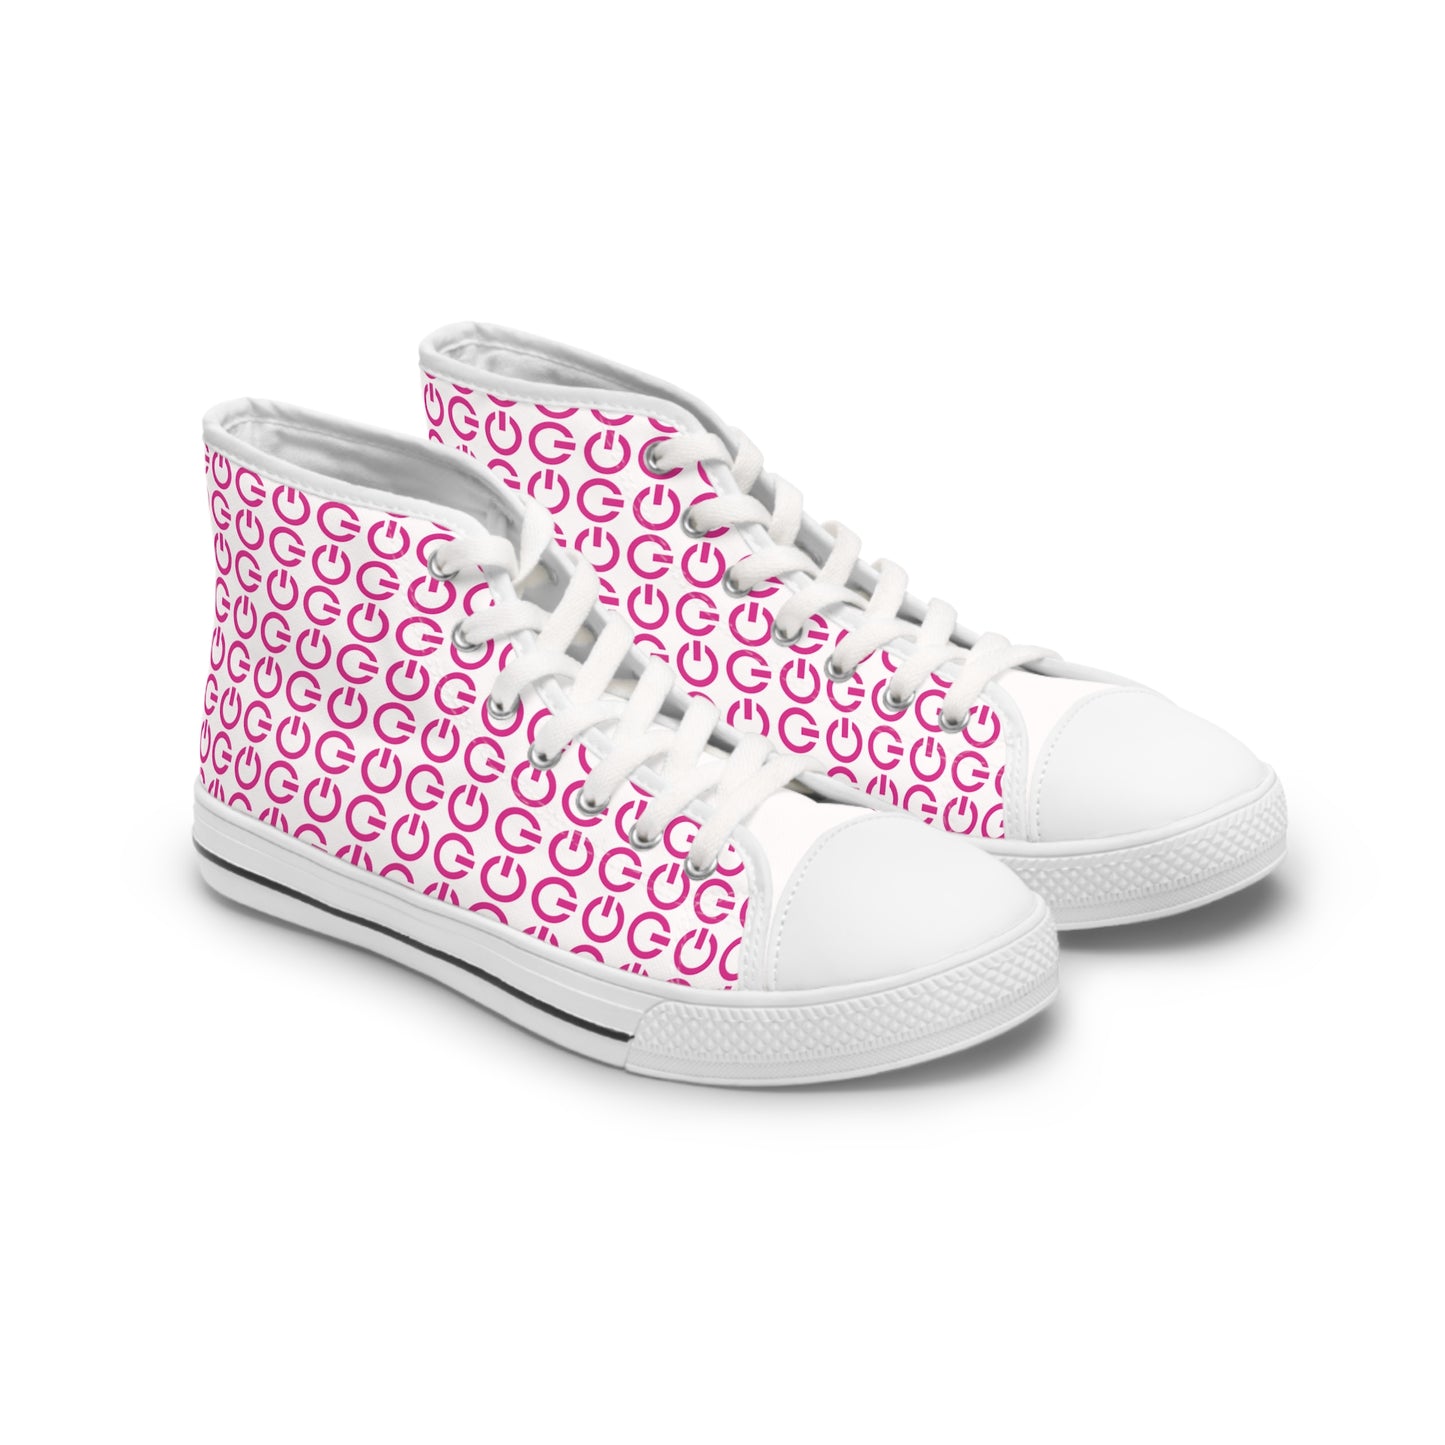 GoGirl High Top Sneakers with G Power Logos